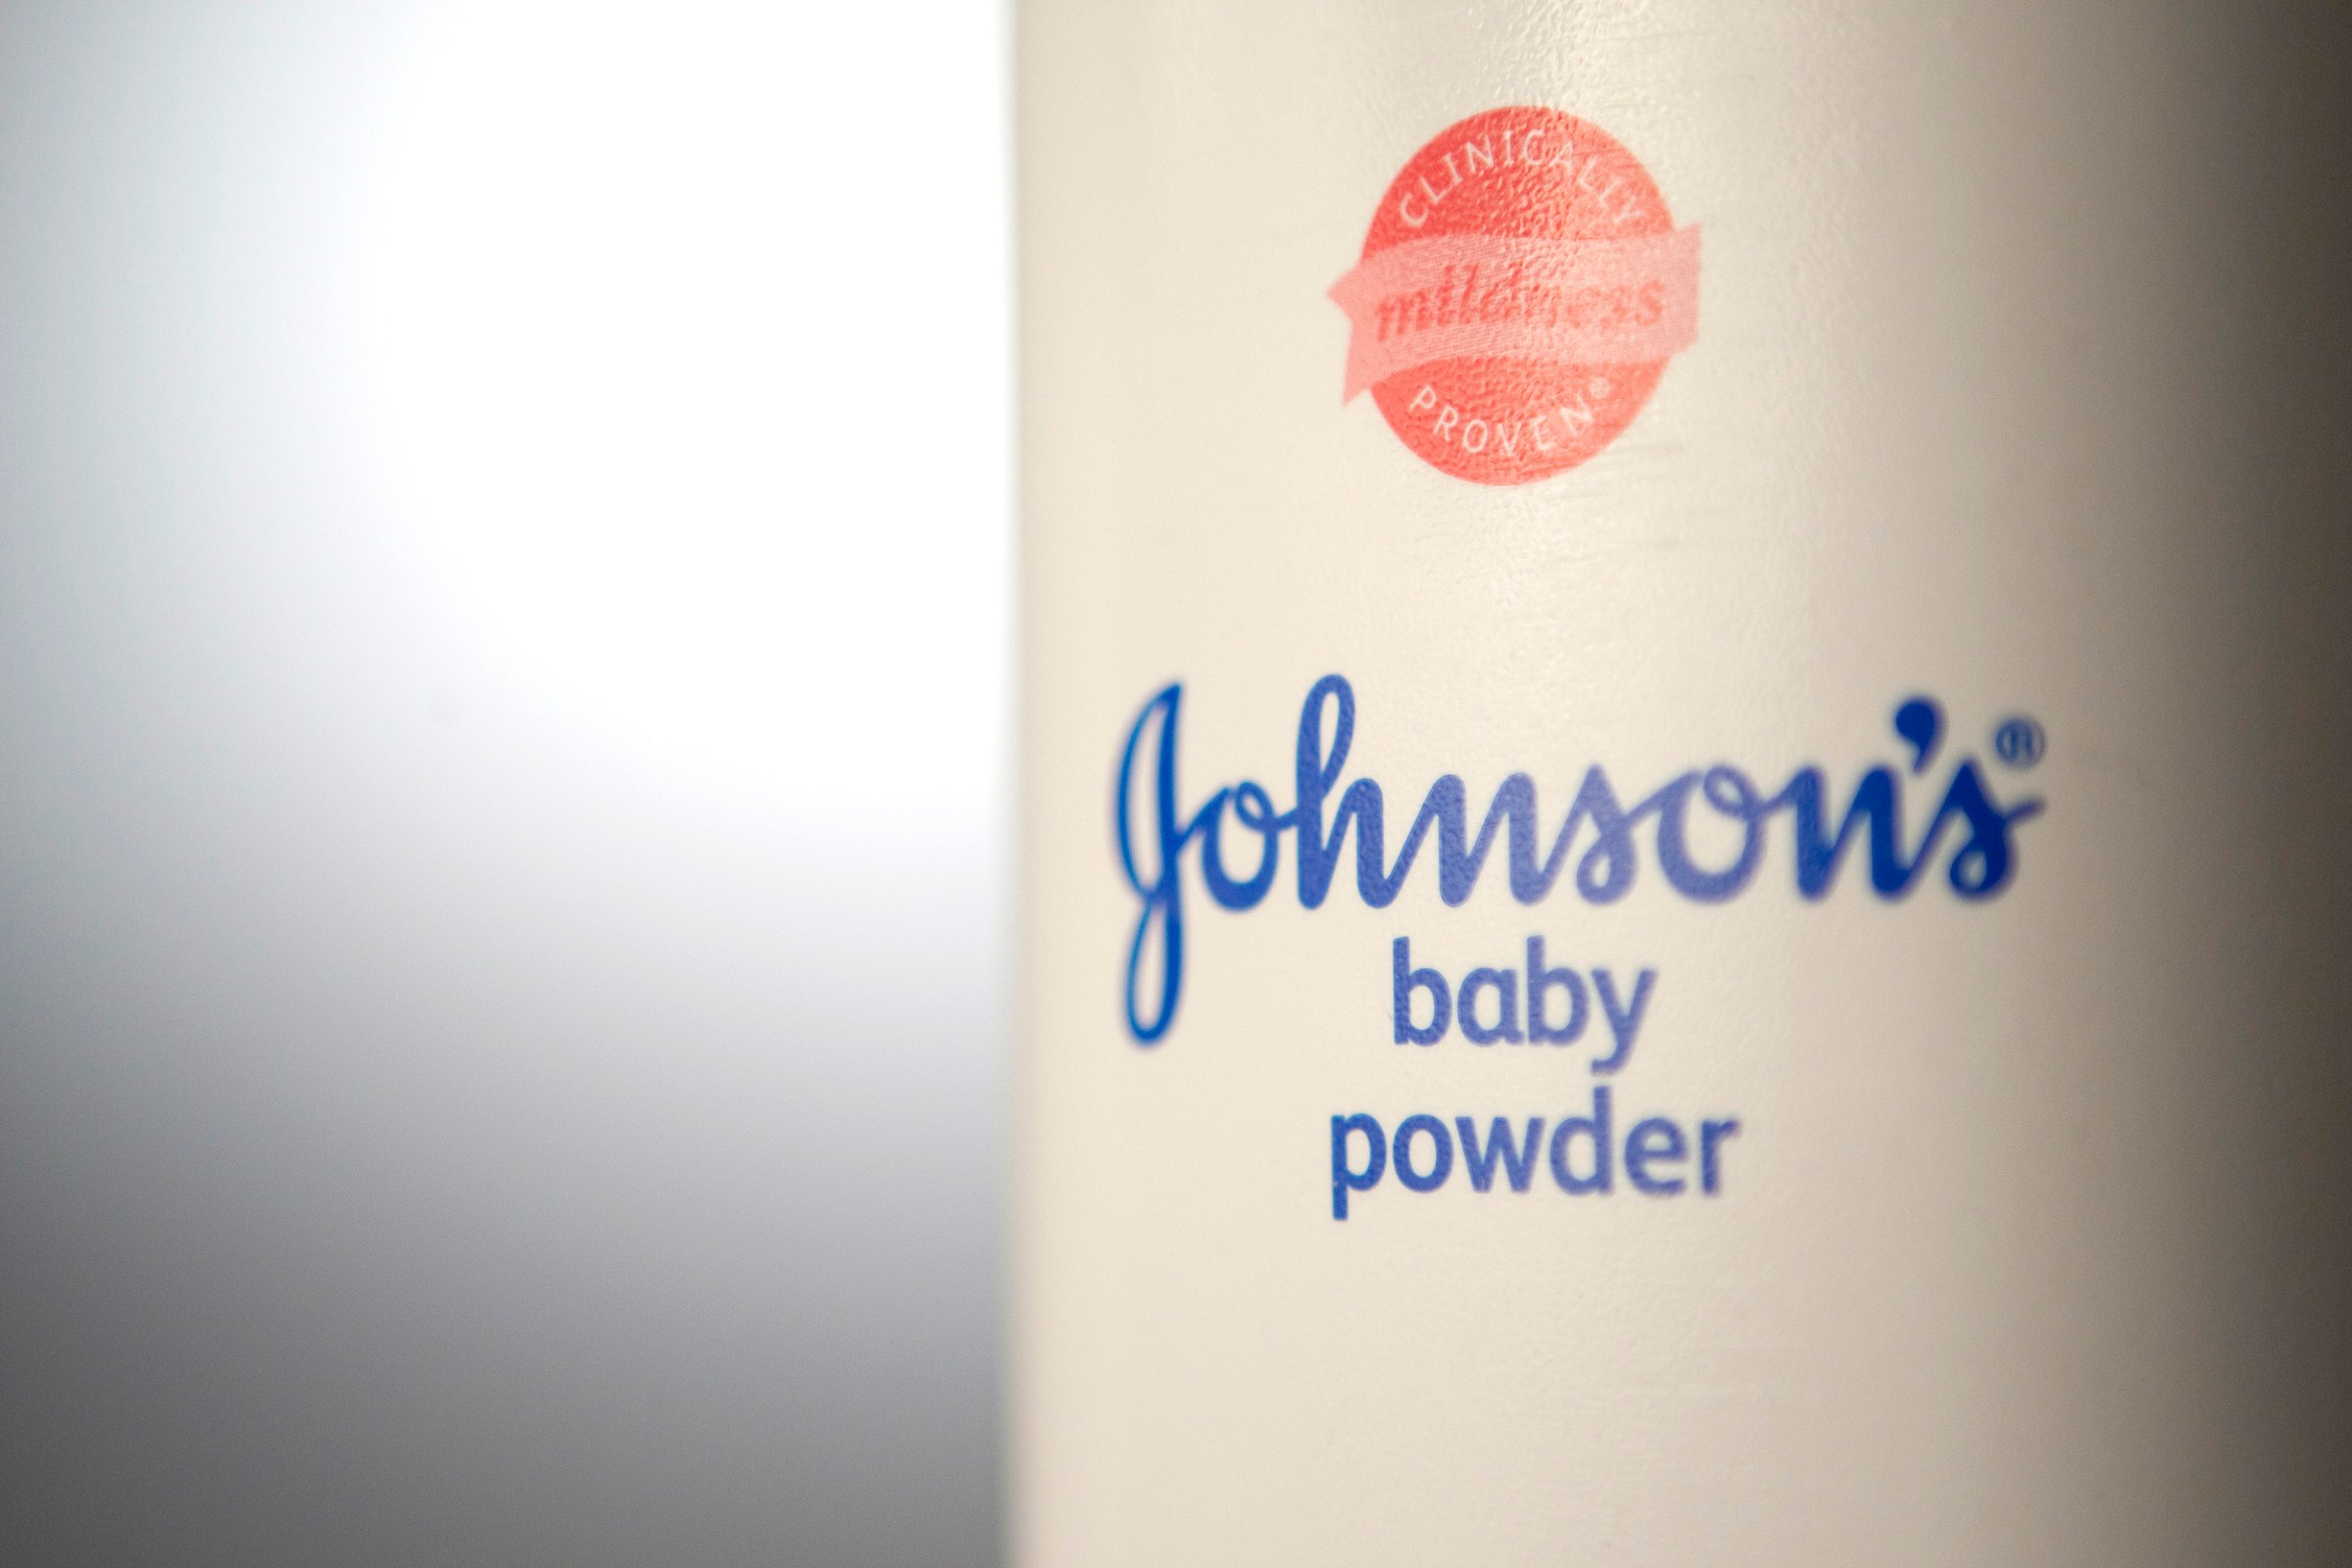 Johnson & Johnson baby powder is arranged for a photograph in New York, on July 15, 2011.